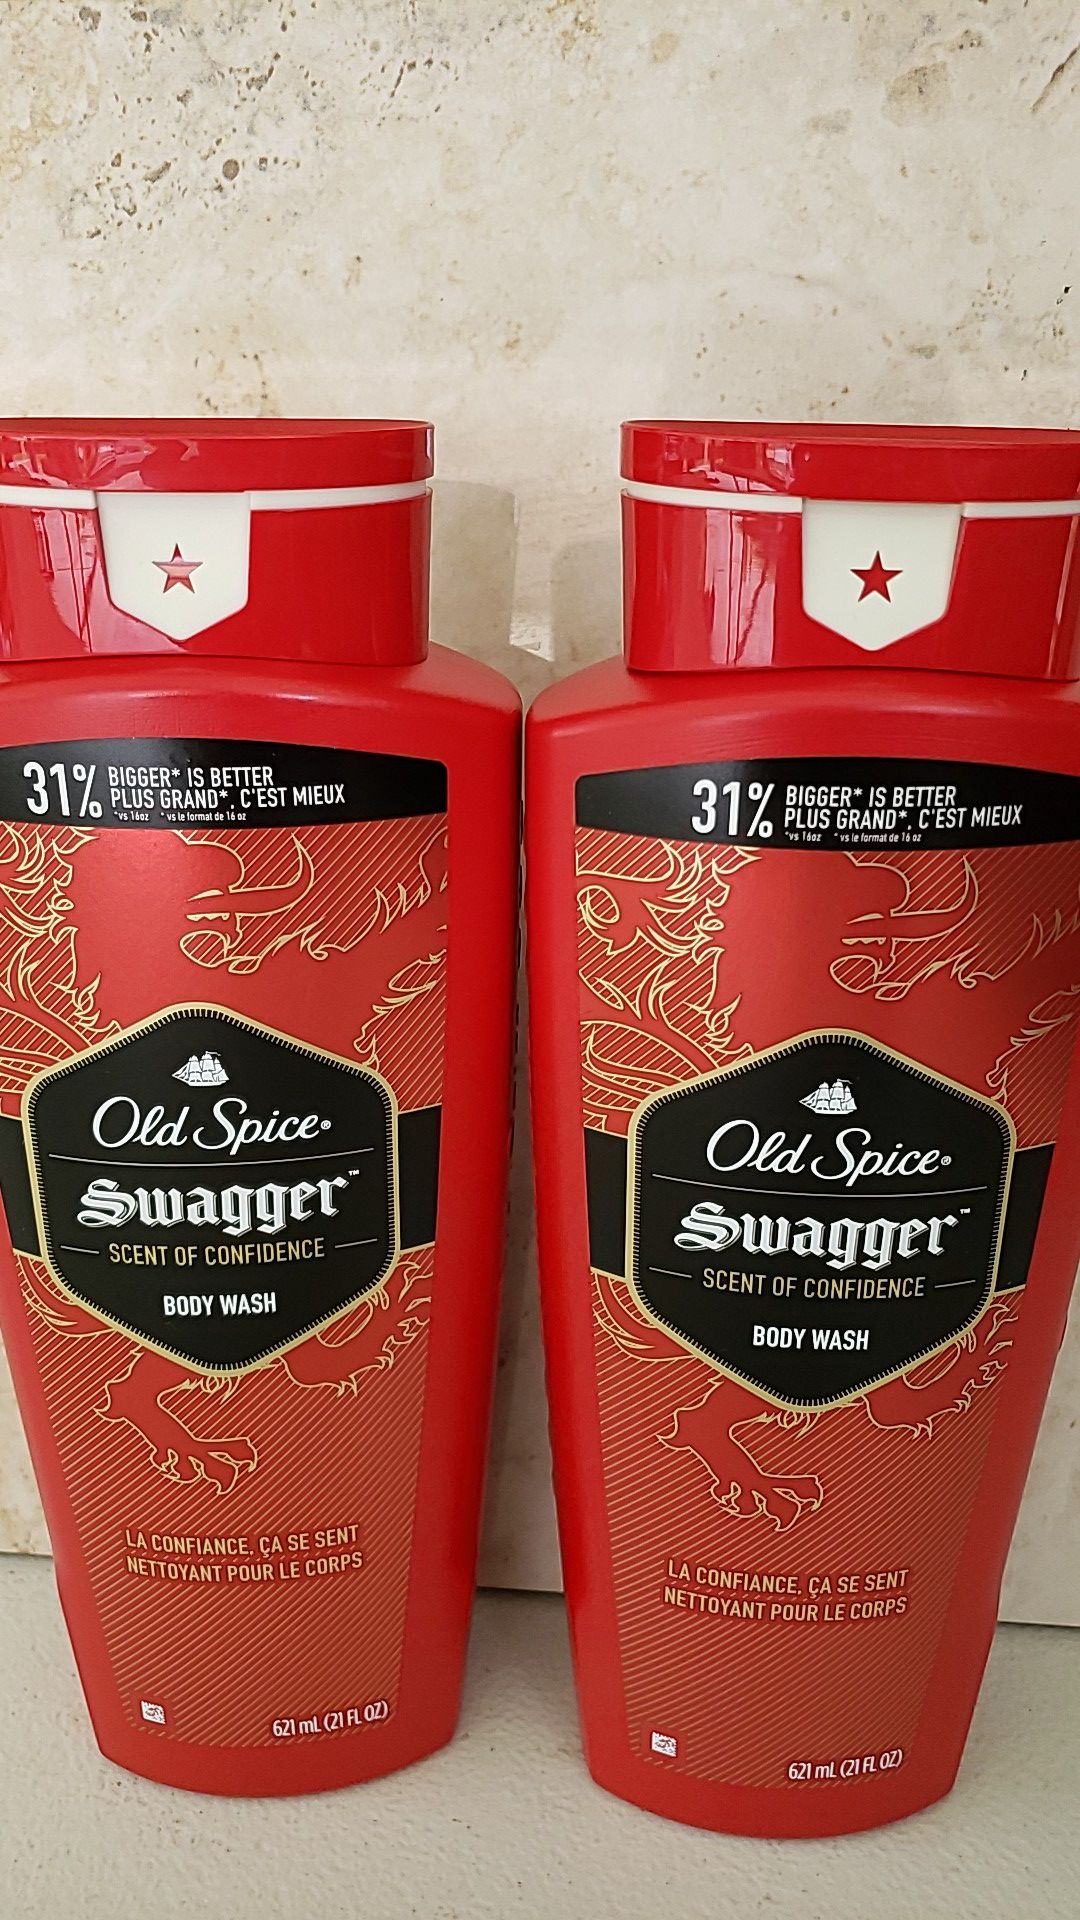 Old spice swagger body wash